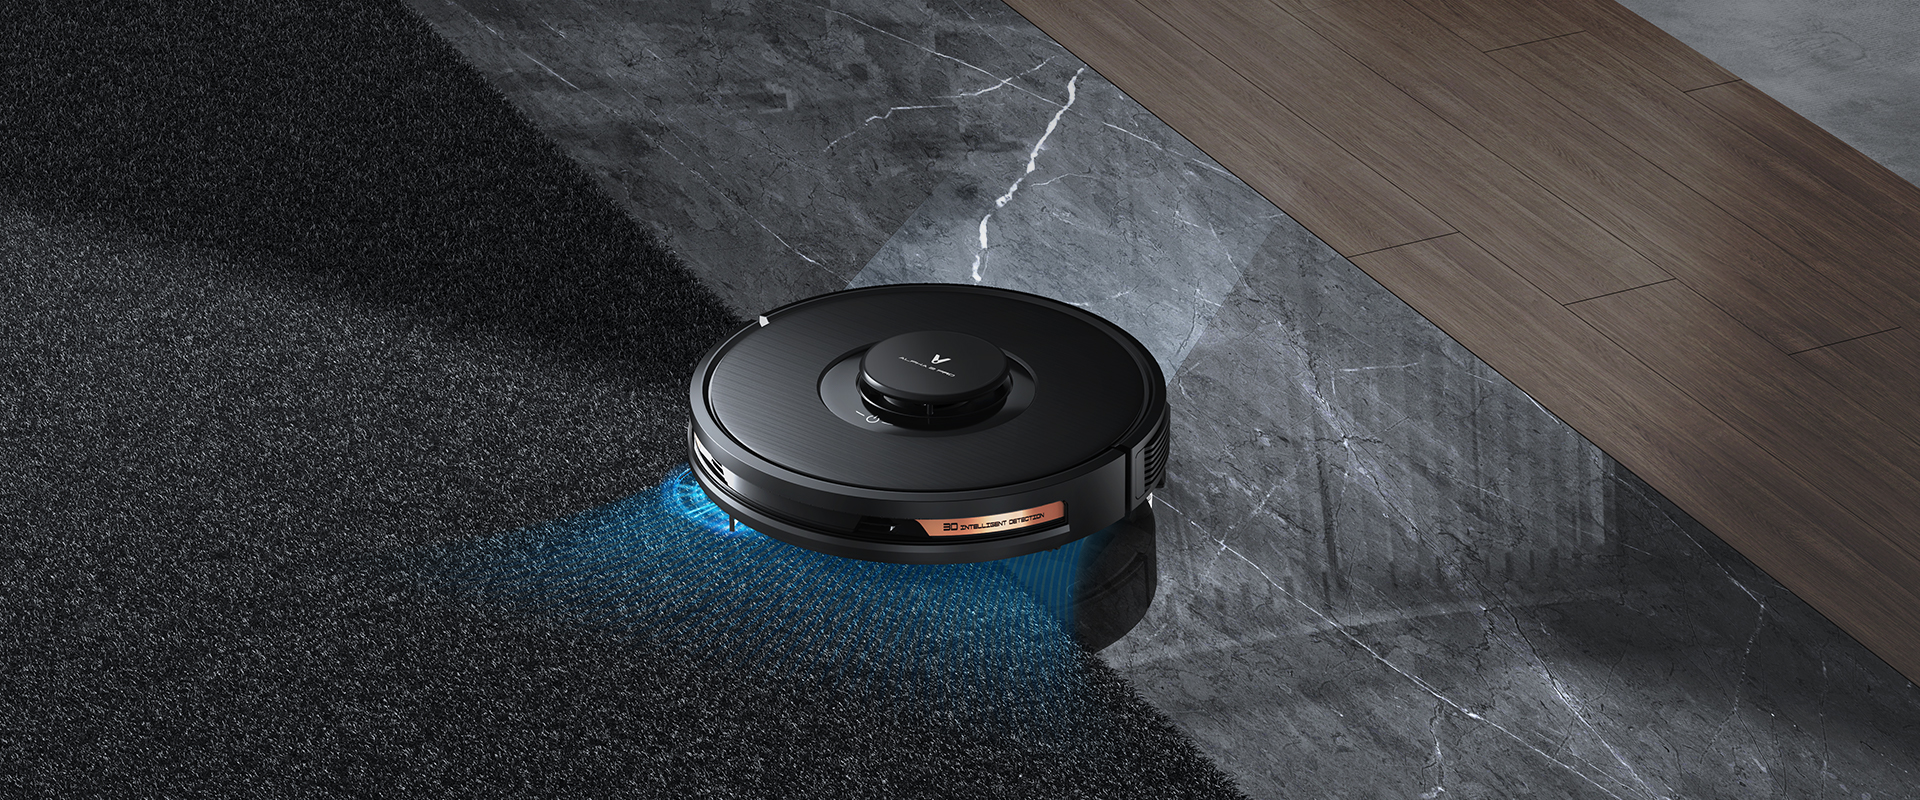 Viomi alpha 2 pro 4000Pa suction 3-in-1  robot vacuum and mop